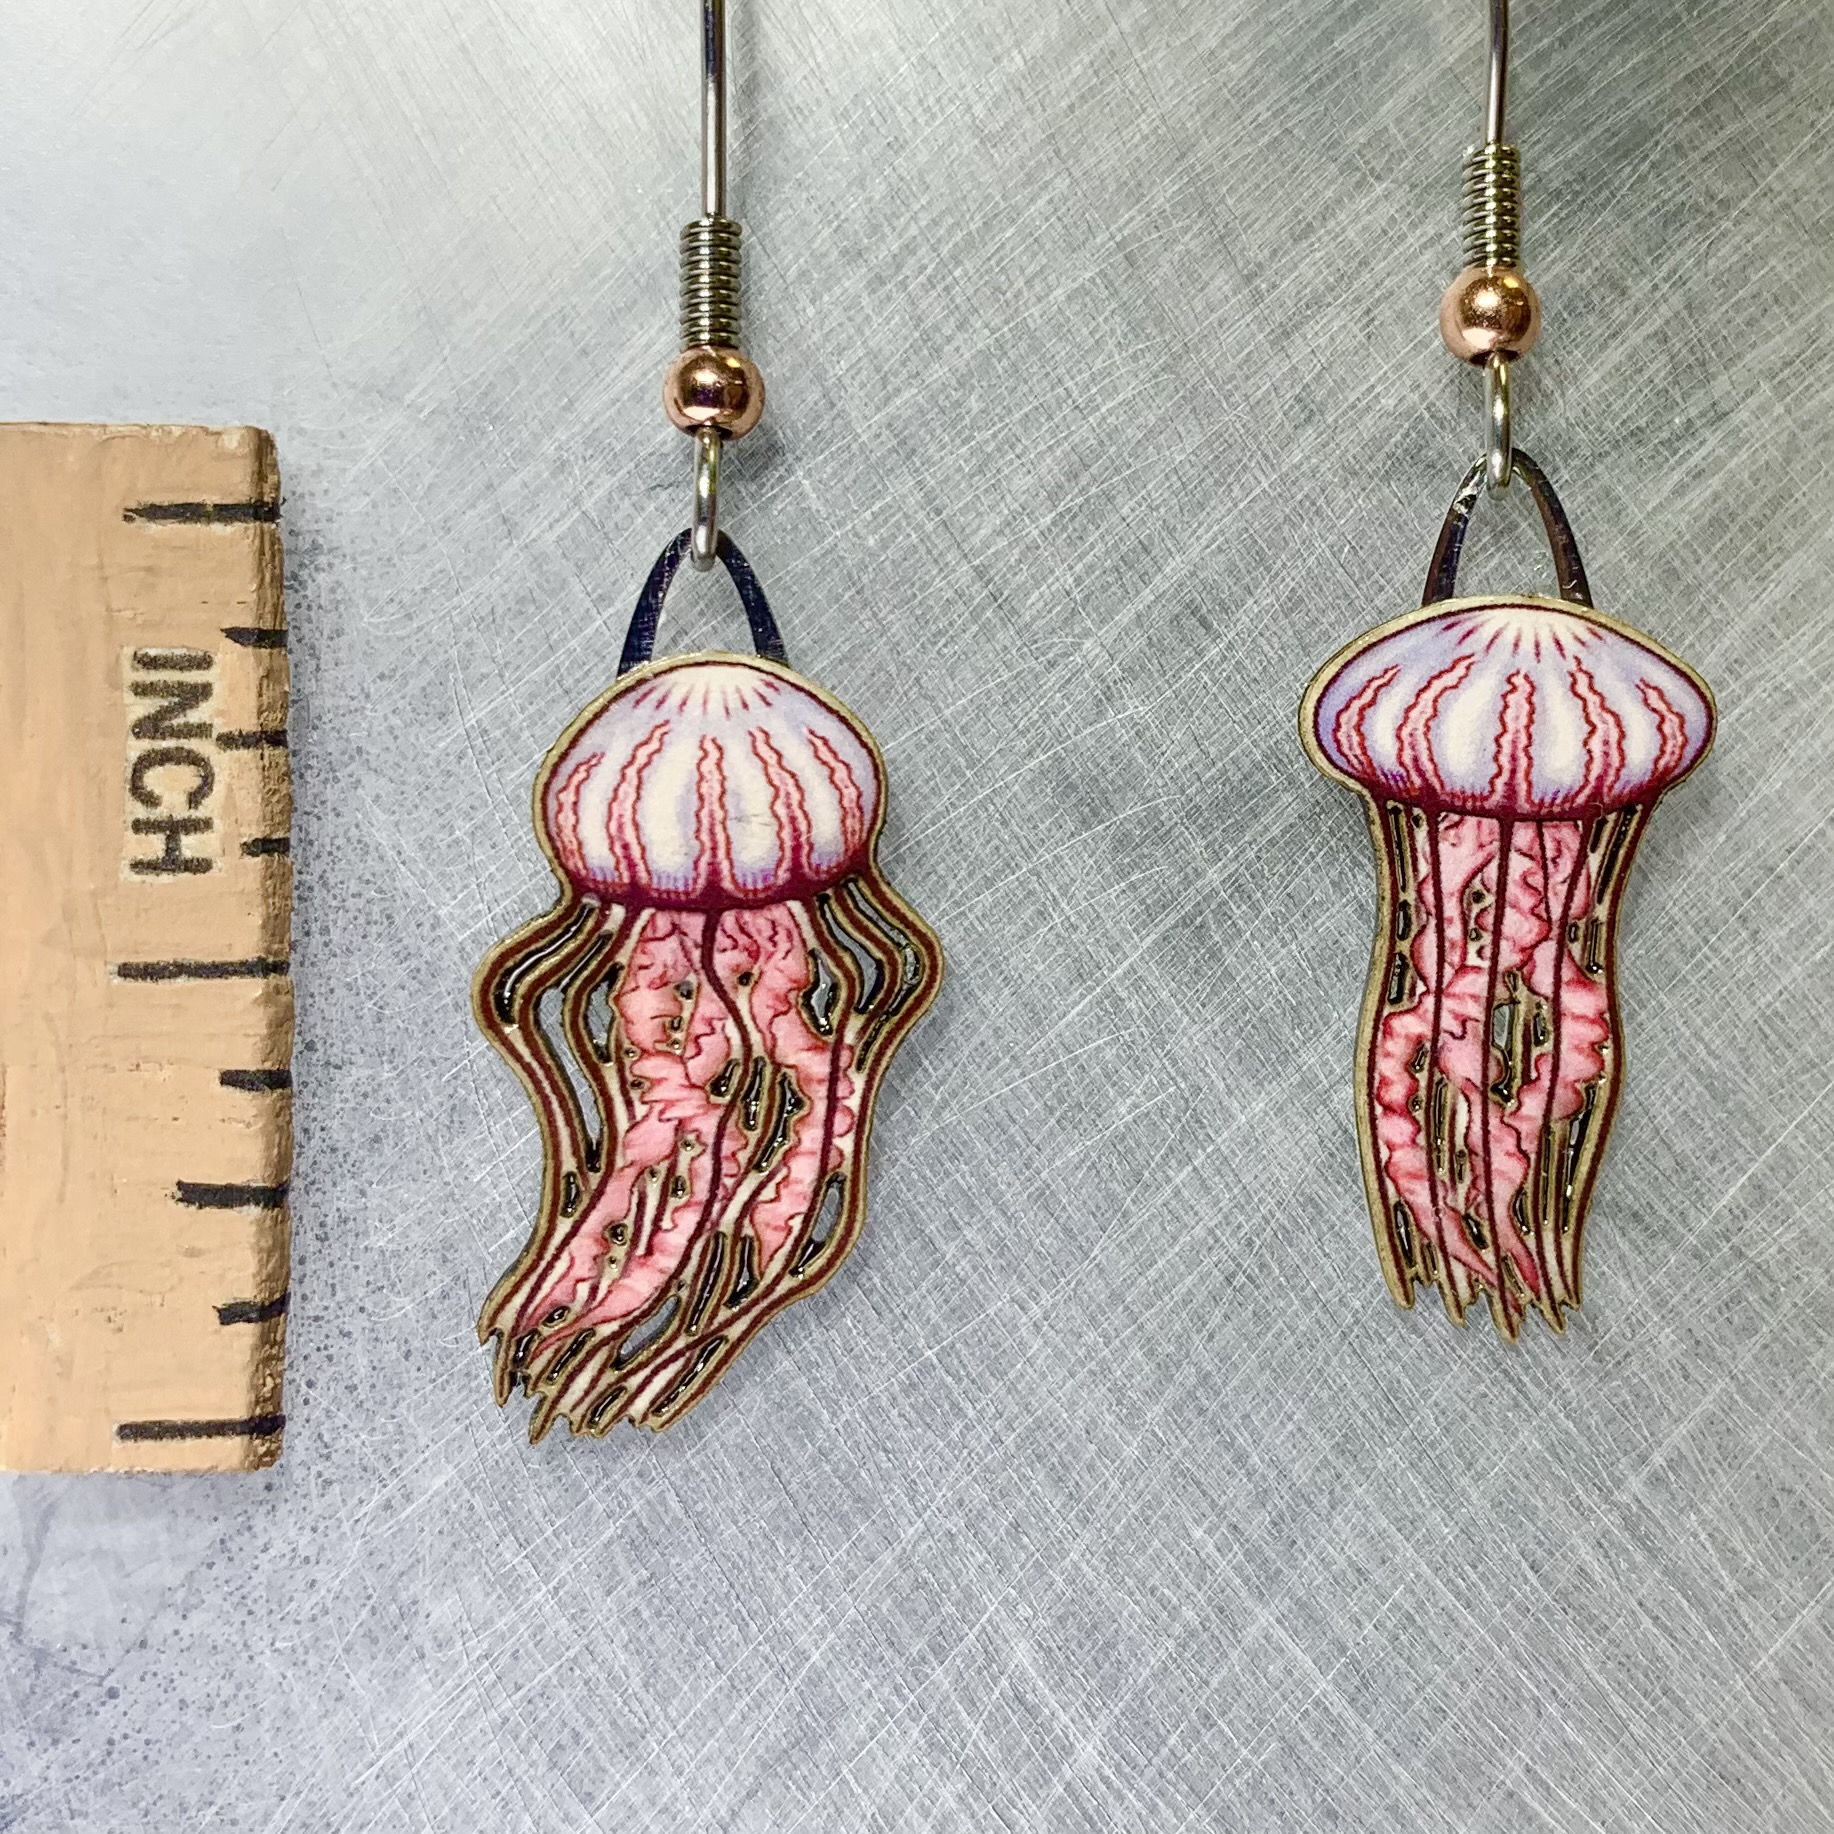 Picture shown is of 1 inch tall pair of earrings of the marine animal the Jellyfish.